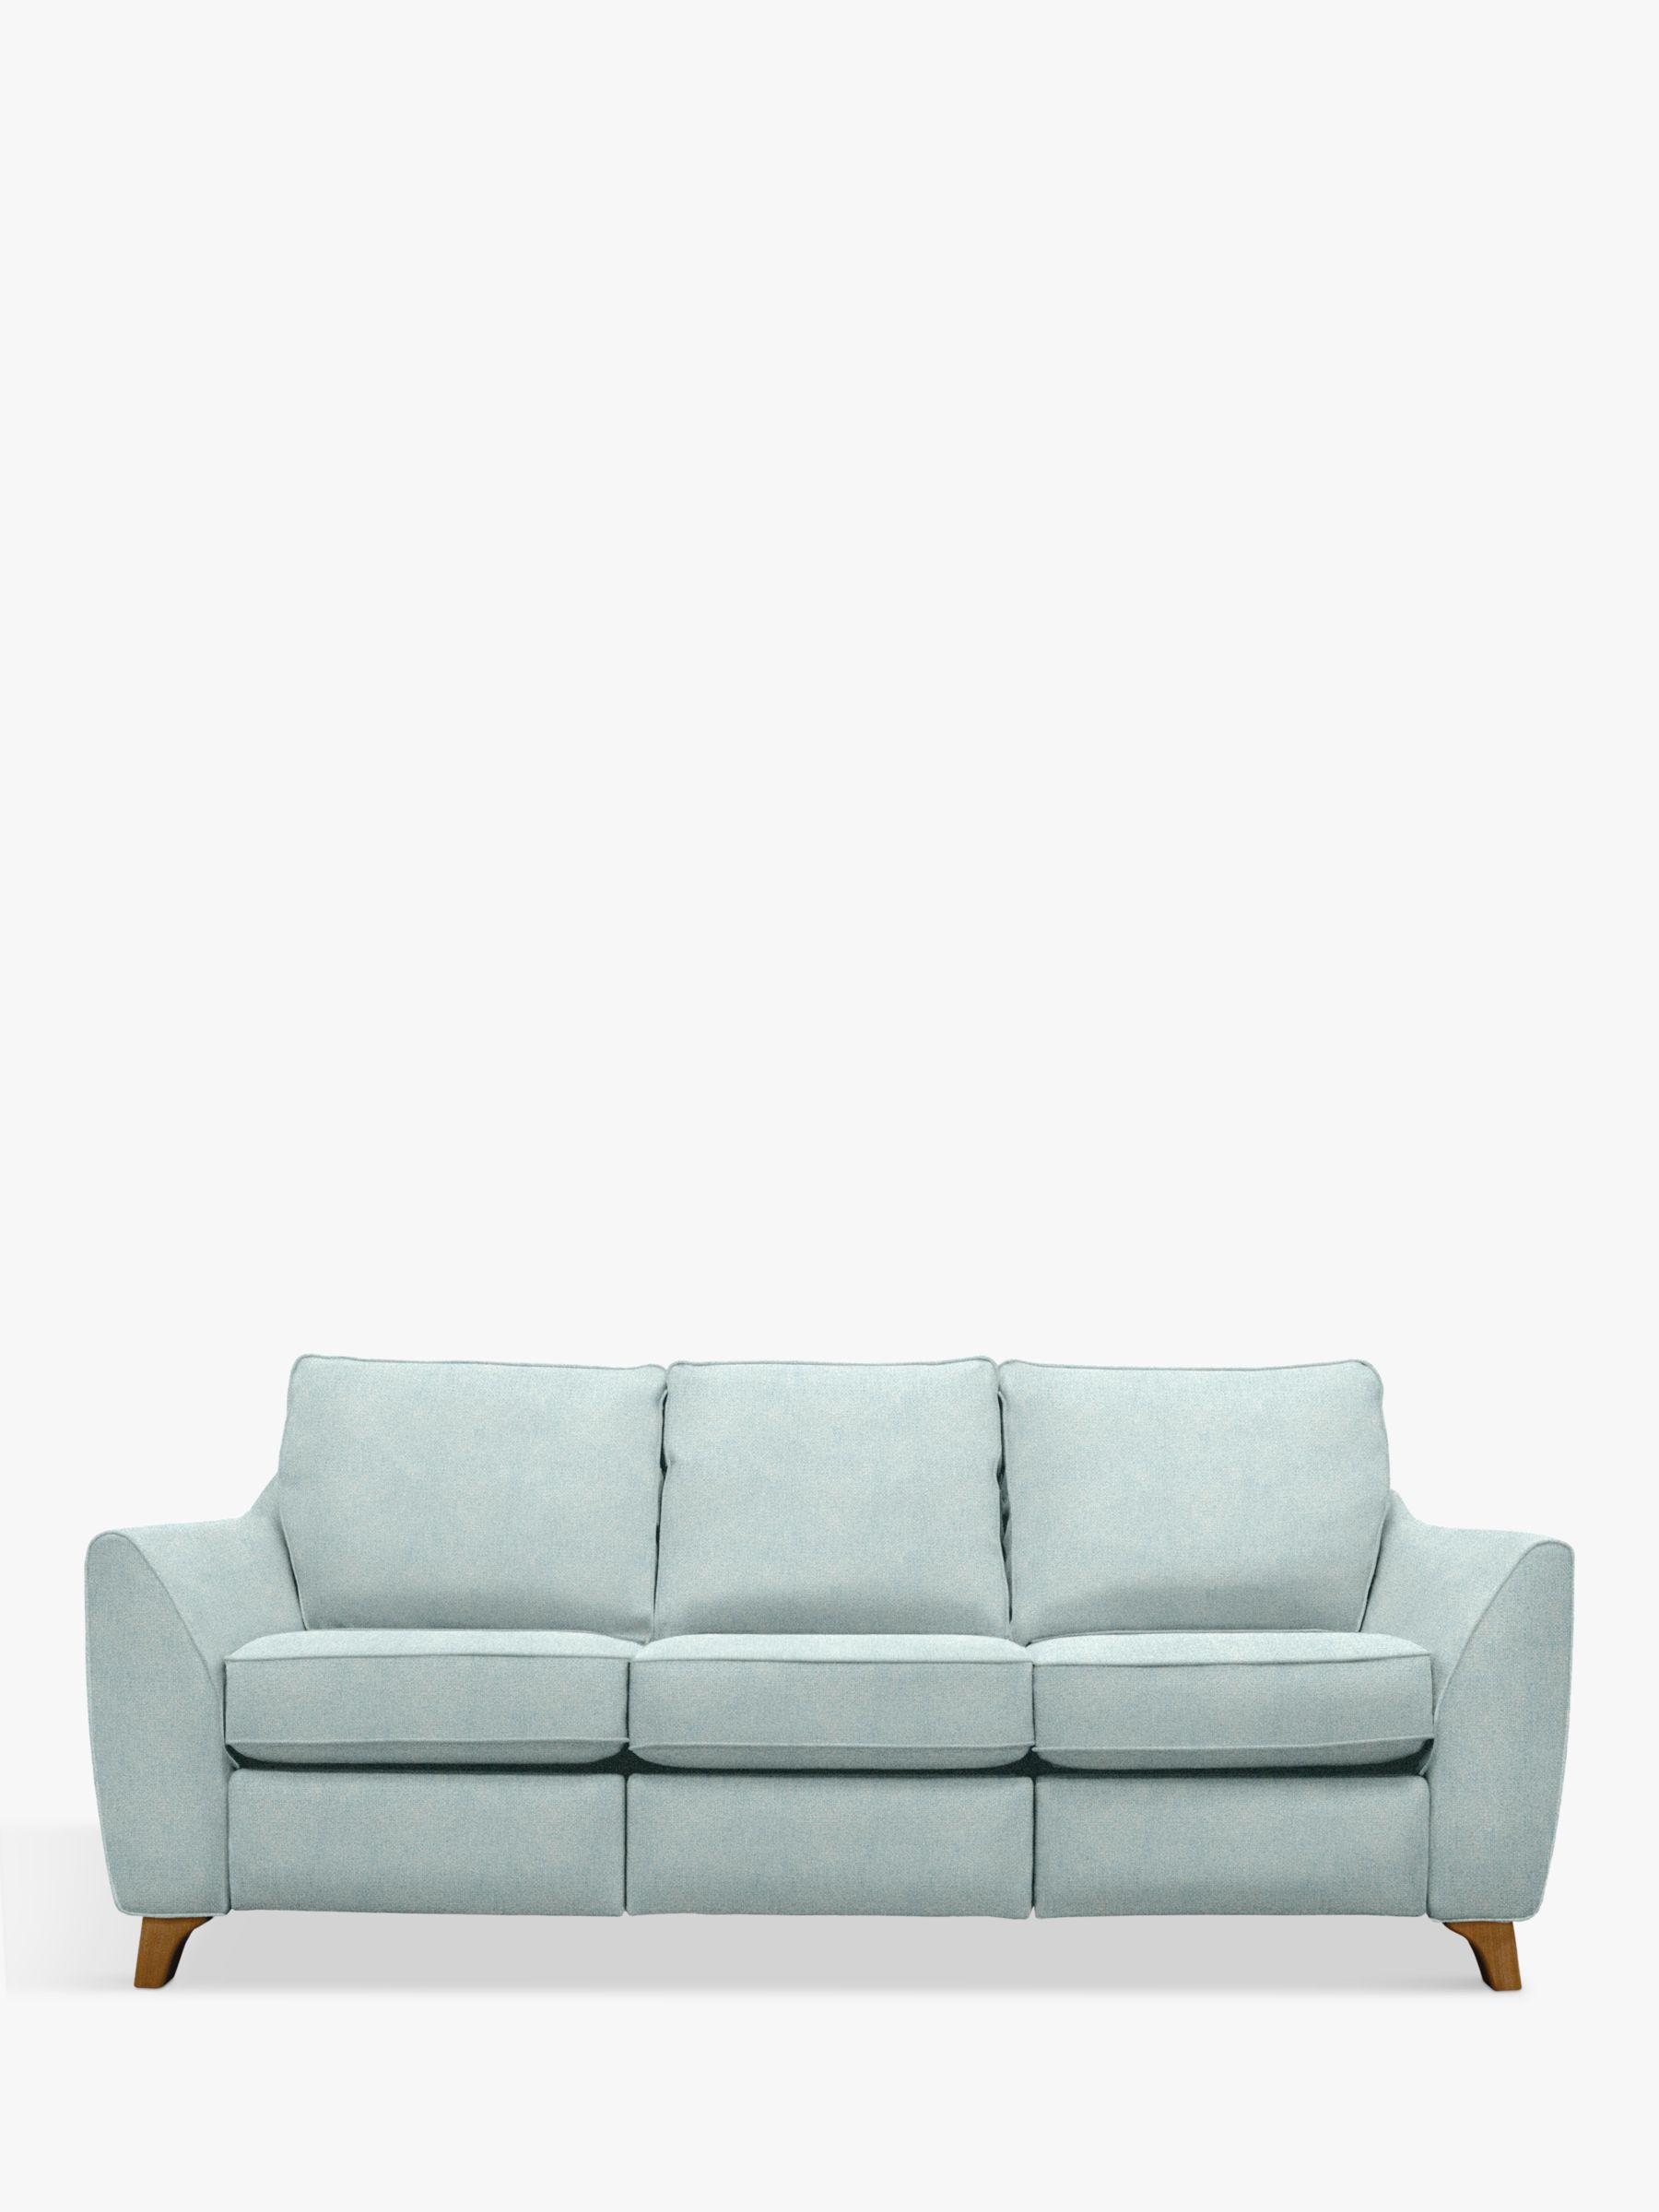 G Plan Vintage The Sixty Eight Large 3 Seater Sofa with ...